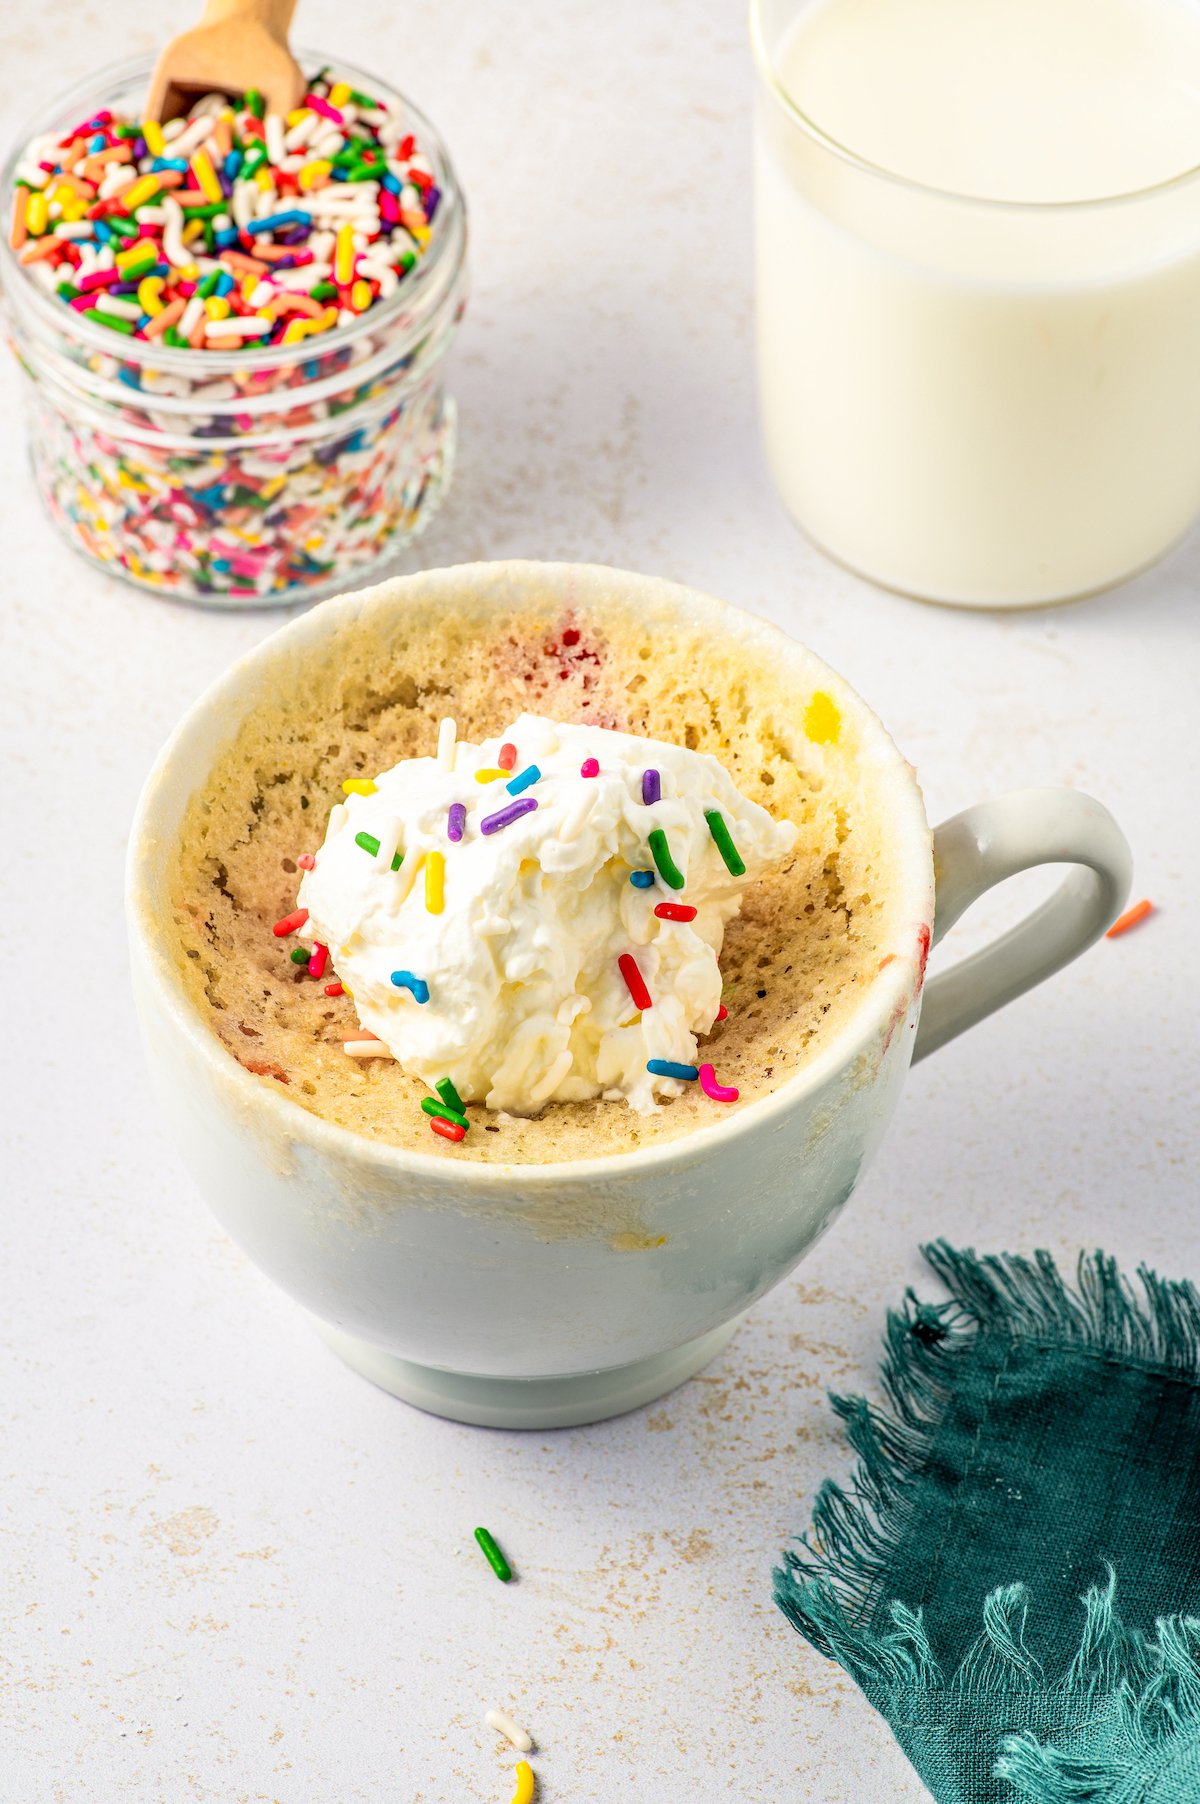 A cake in a mug, topped with whipped cream and sprinkles.